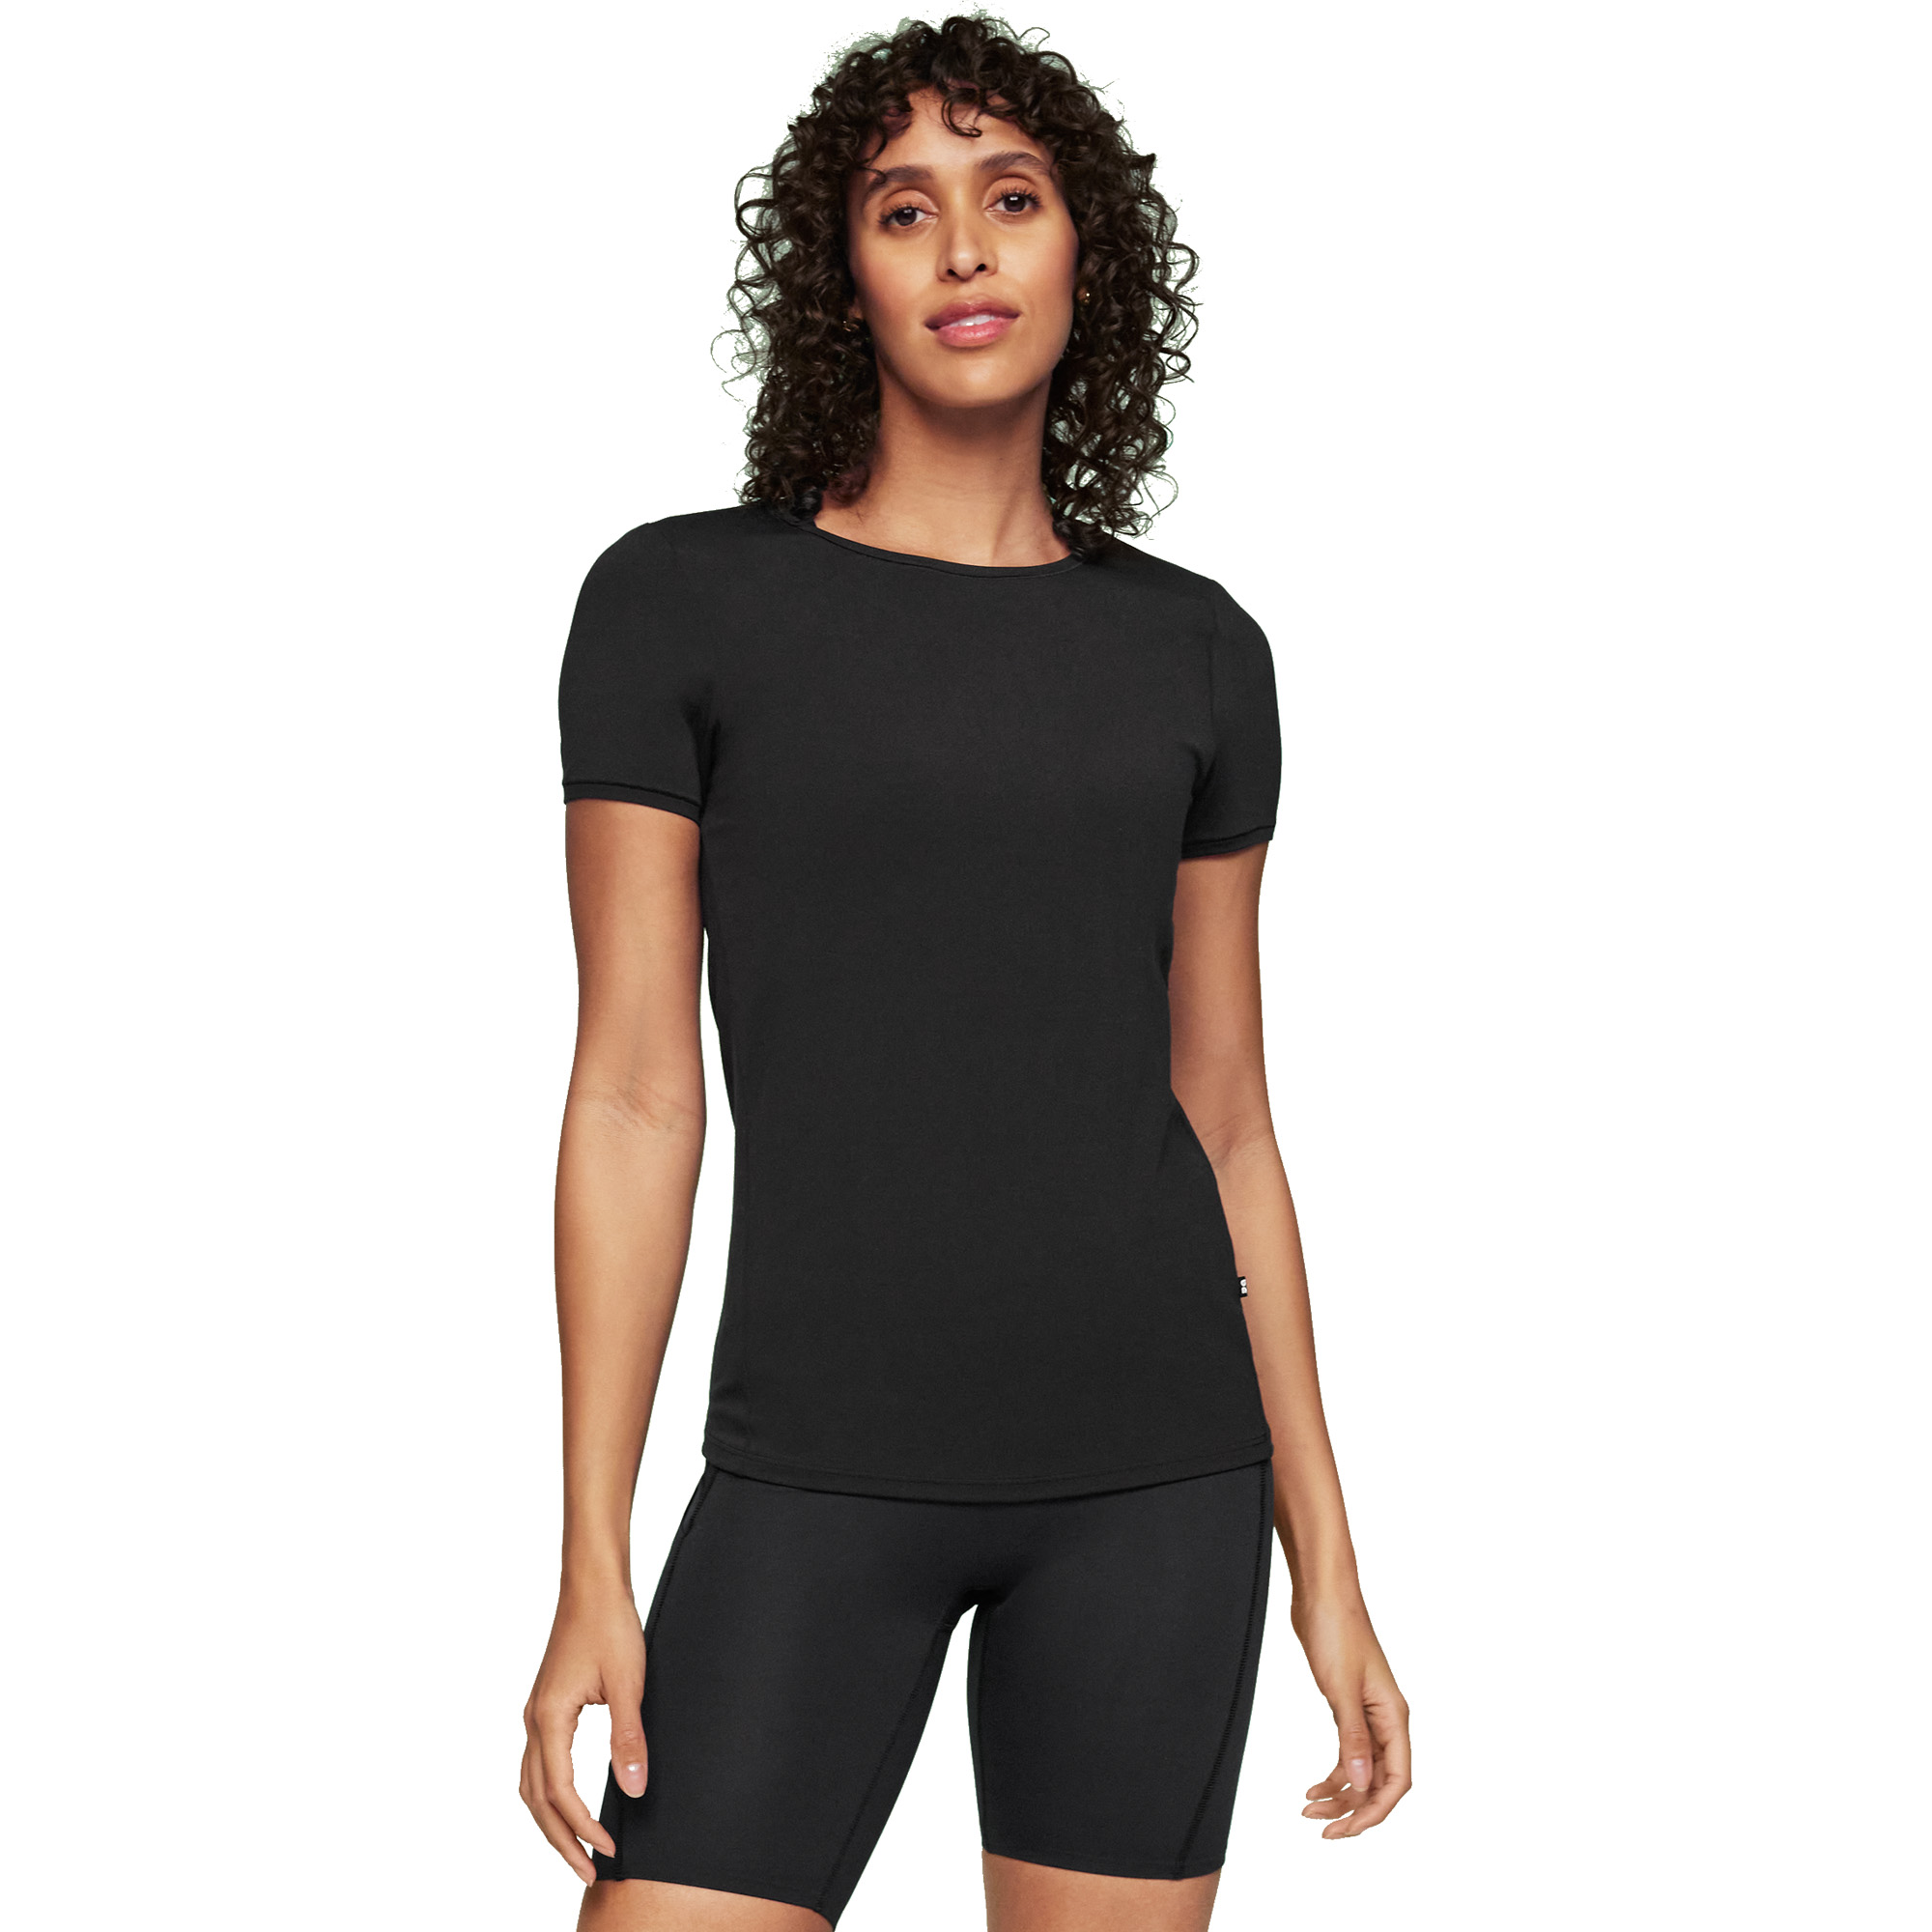 On Movement-T Women's Top 